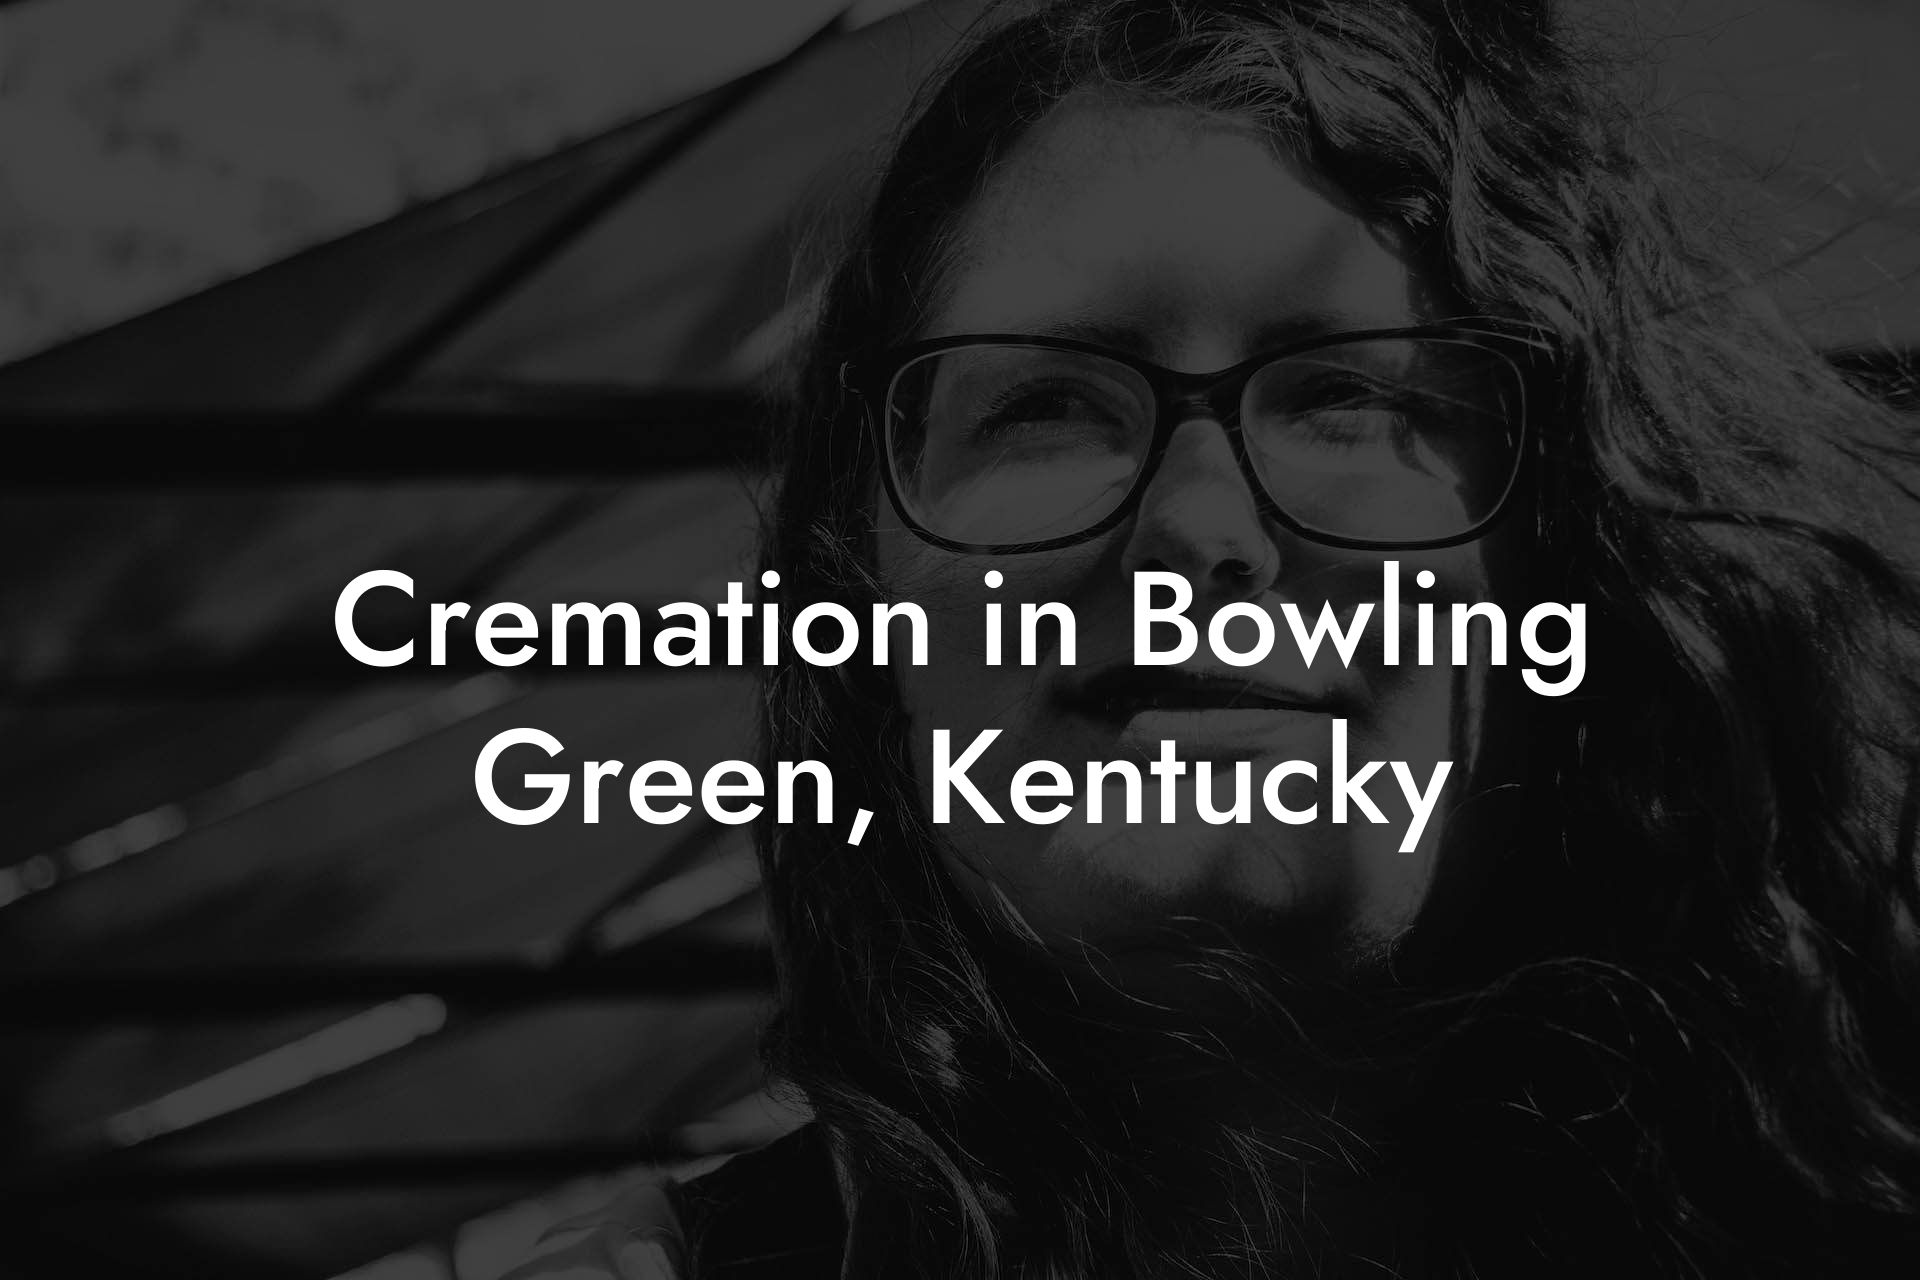 Cremation in Bowling Green, Kentucky